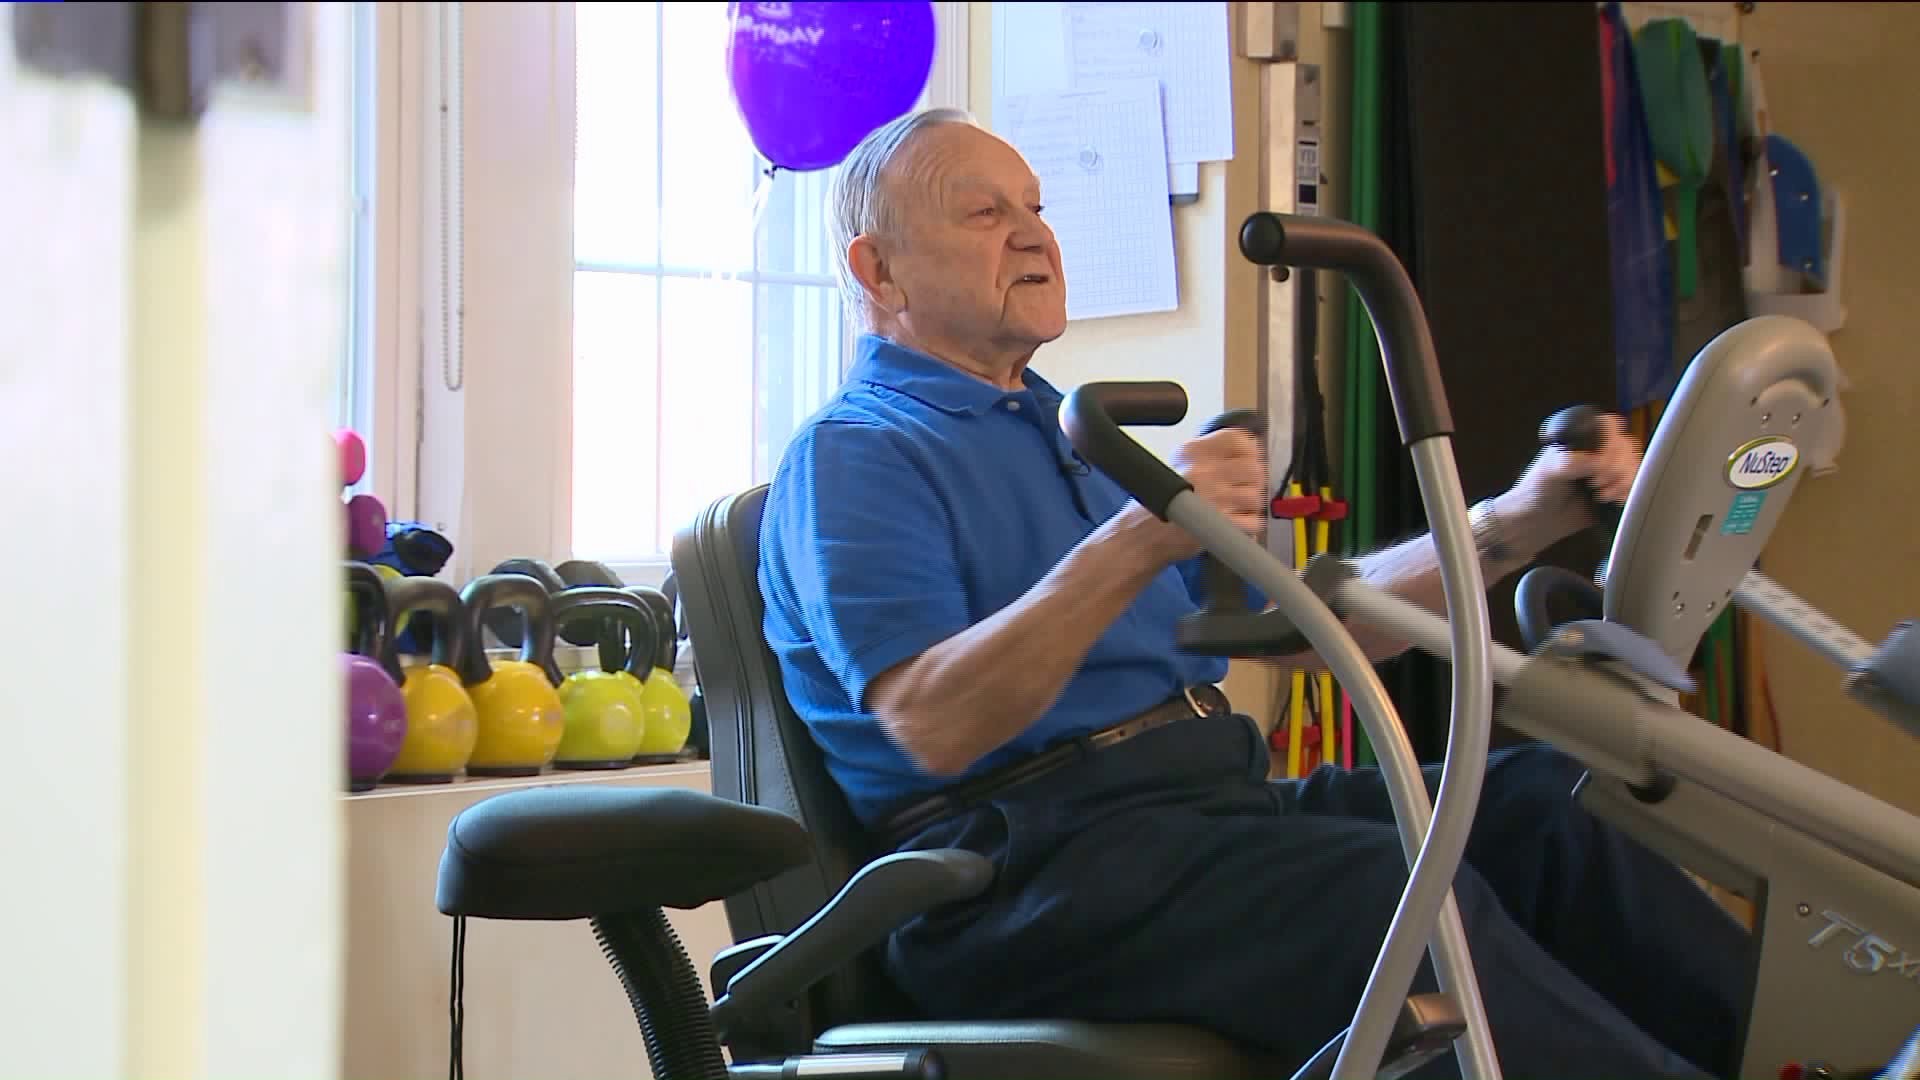 Raising the bar in New Britain, 90-year old provides a lift